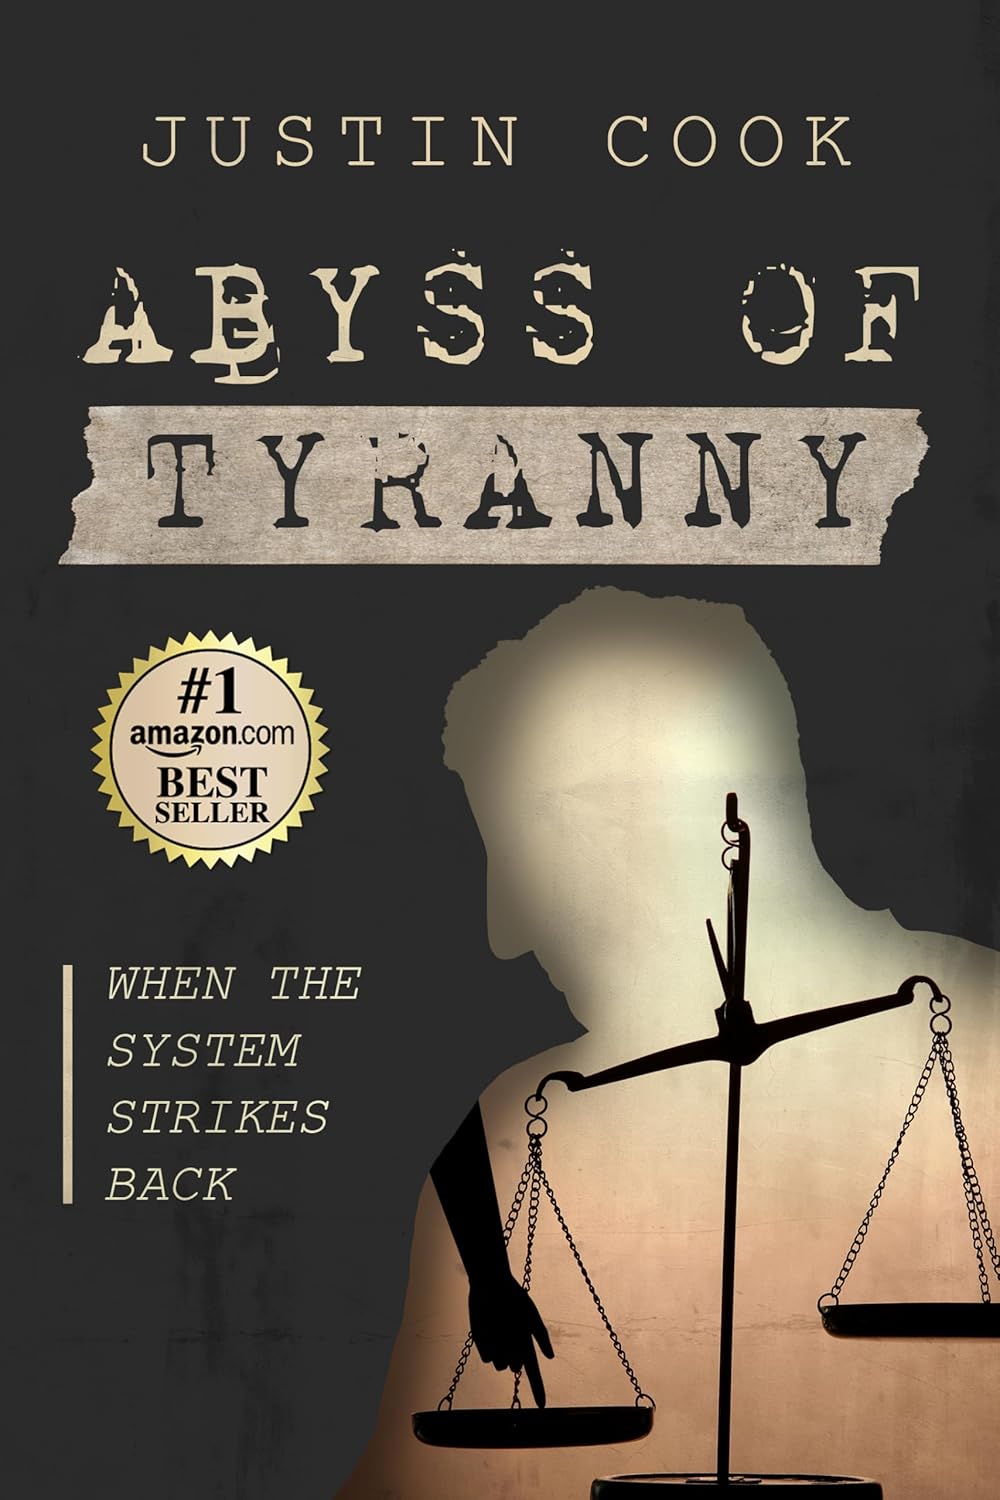 New book "Abyss of Tyranny" by Justin Cook is released, a scathing look at injustice in the United States and the path to finding wholeness outside of broken systems